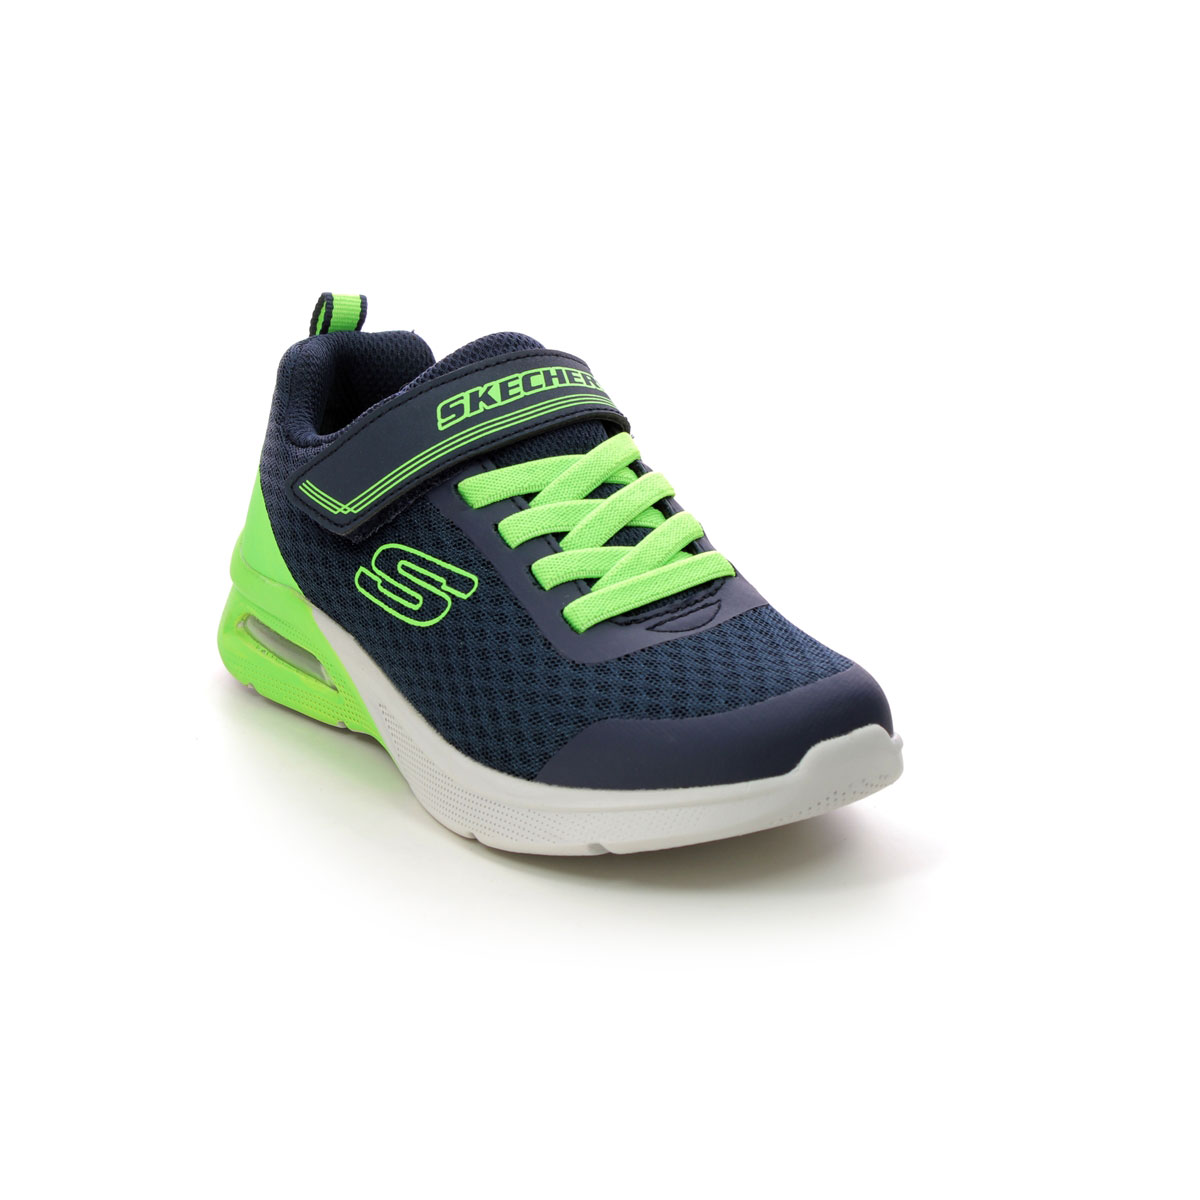 Skechers Microspec Max NVLM Navy Lime Kids trainers 403773L in a Plain Textile in Size 37